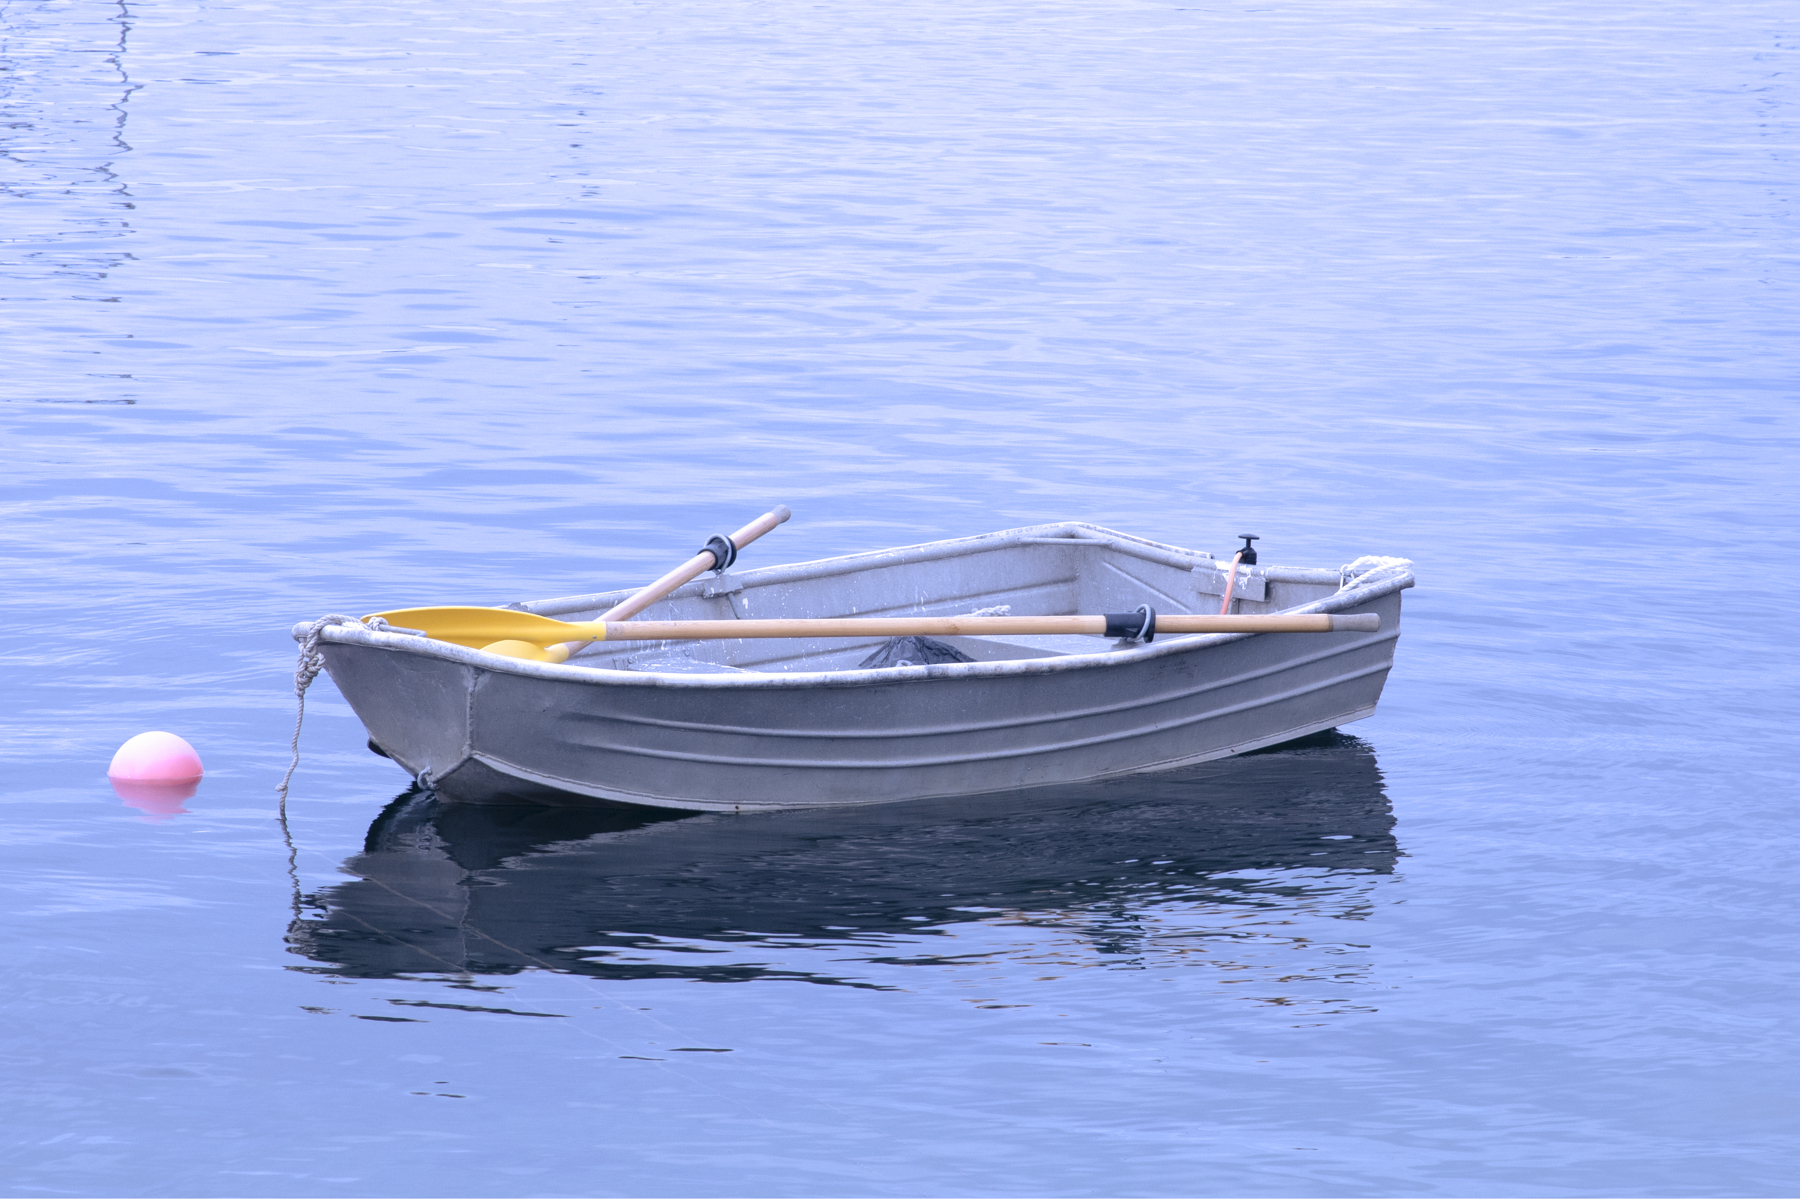 empty rowboat on the water with crossed oars